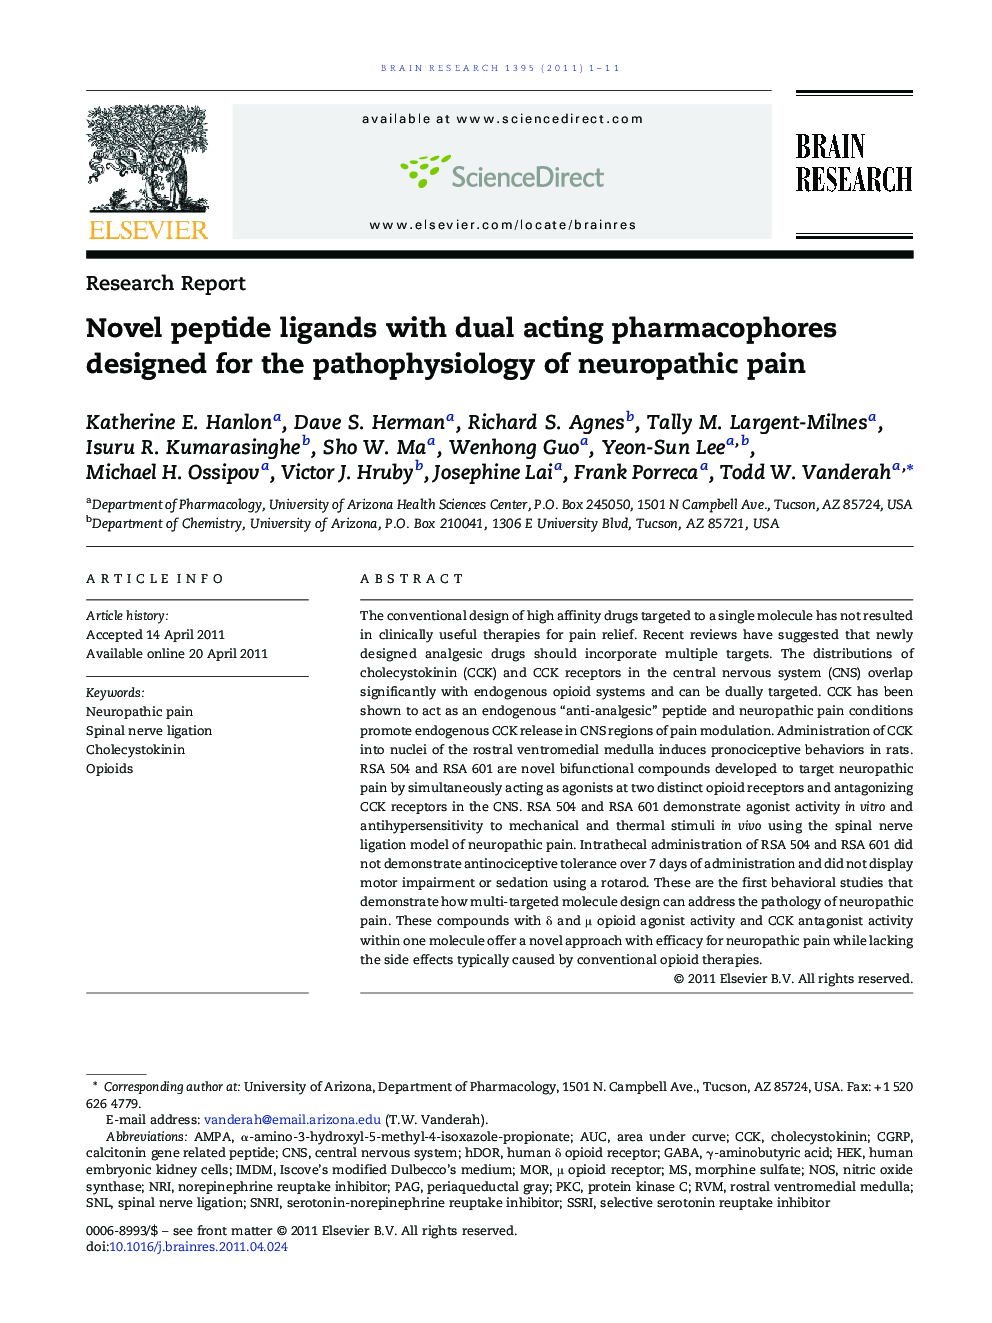 Novel peptide ligands with dual acting pharmacophores designed for the pathophysiology of neuropathic pain